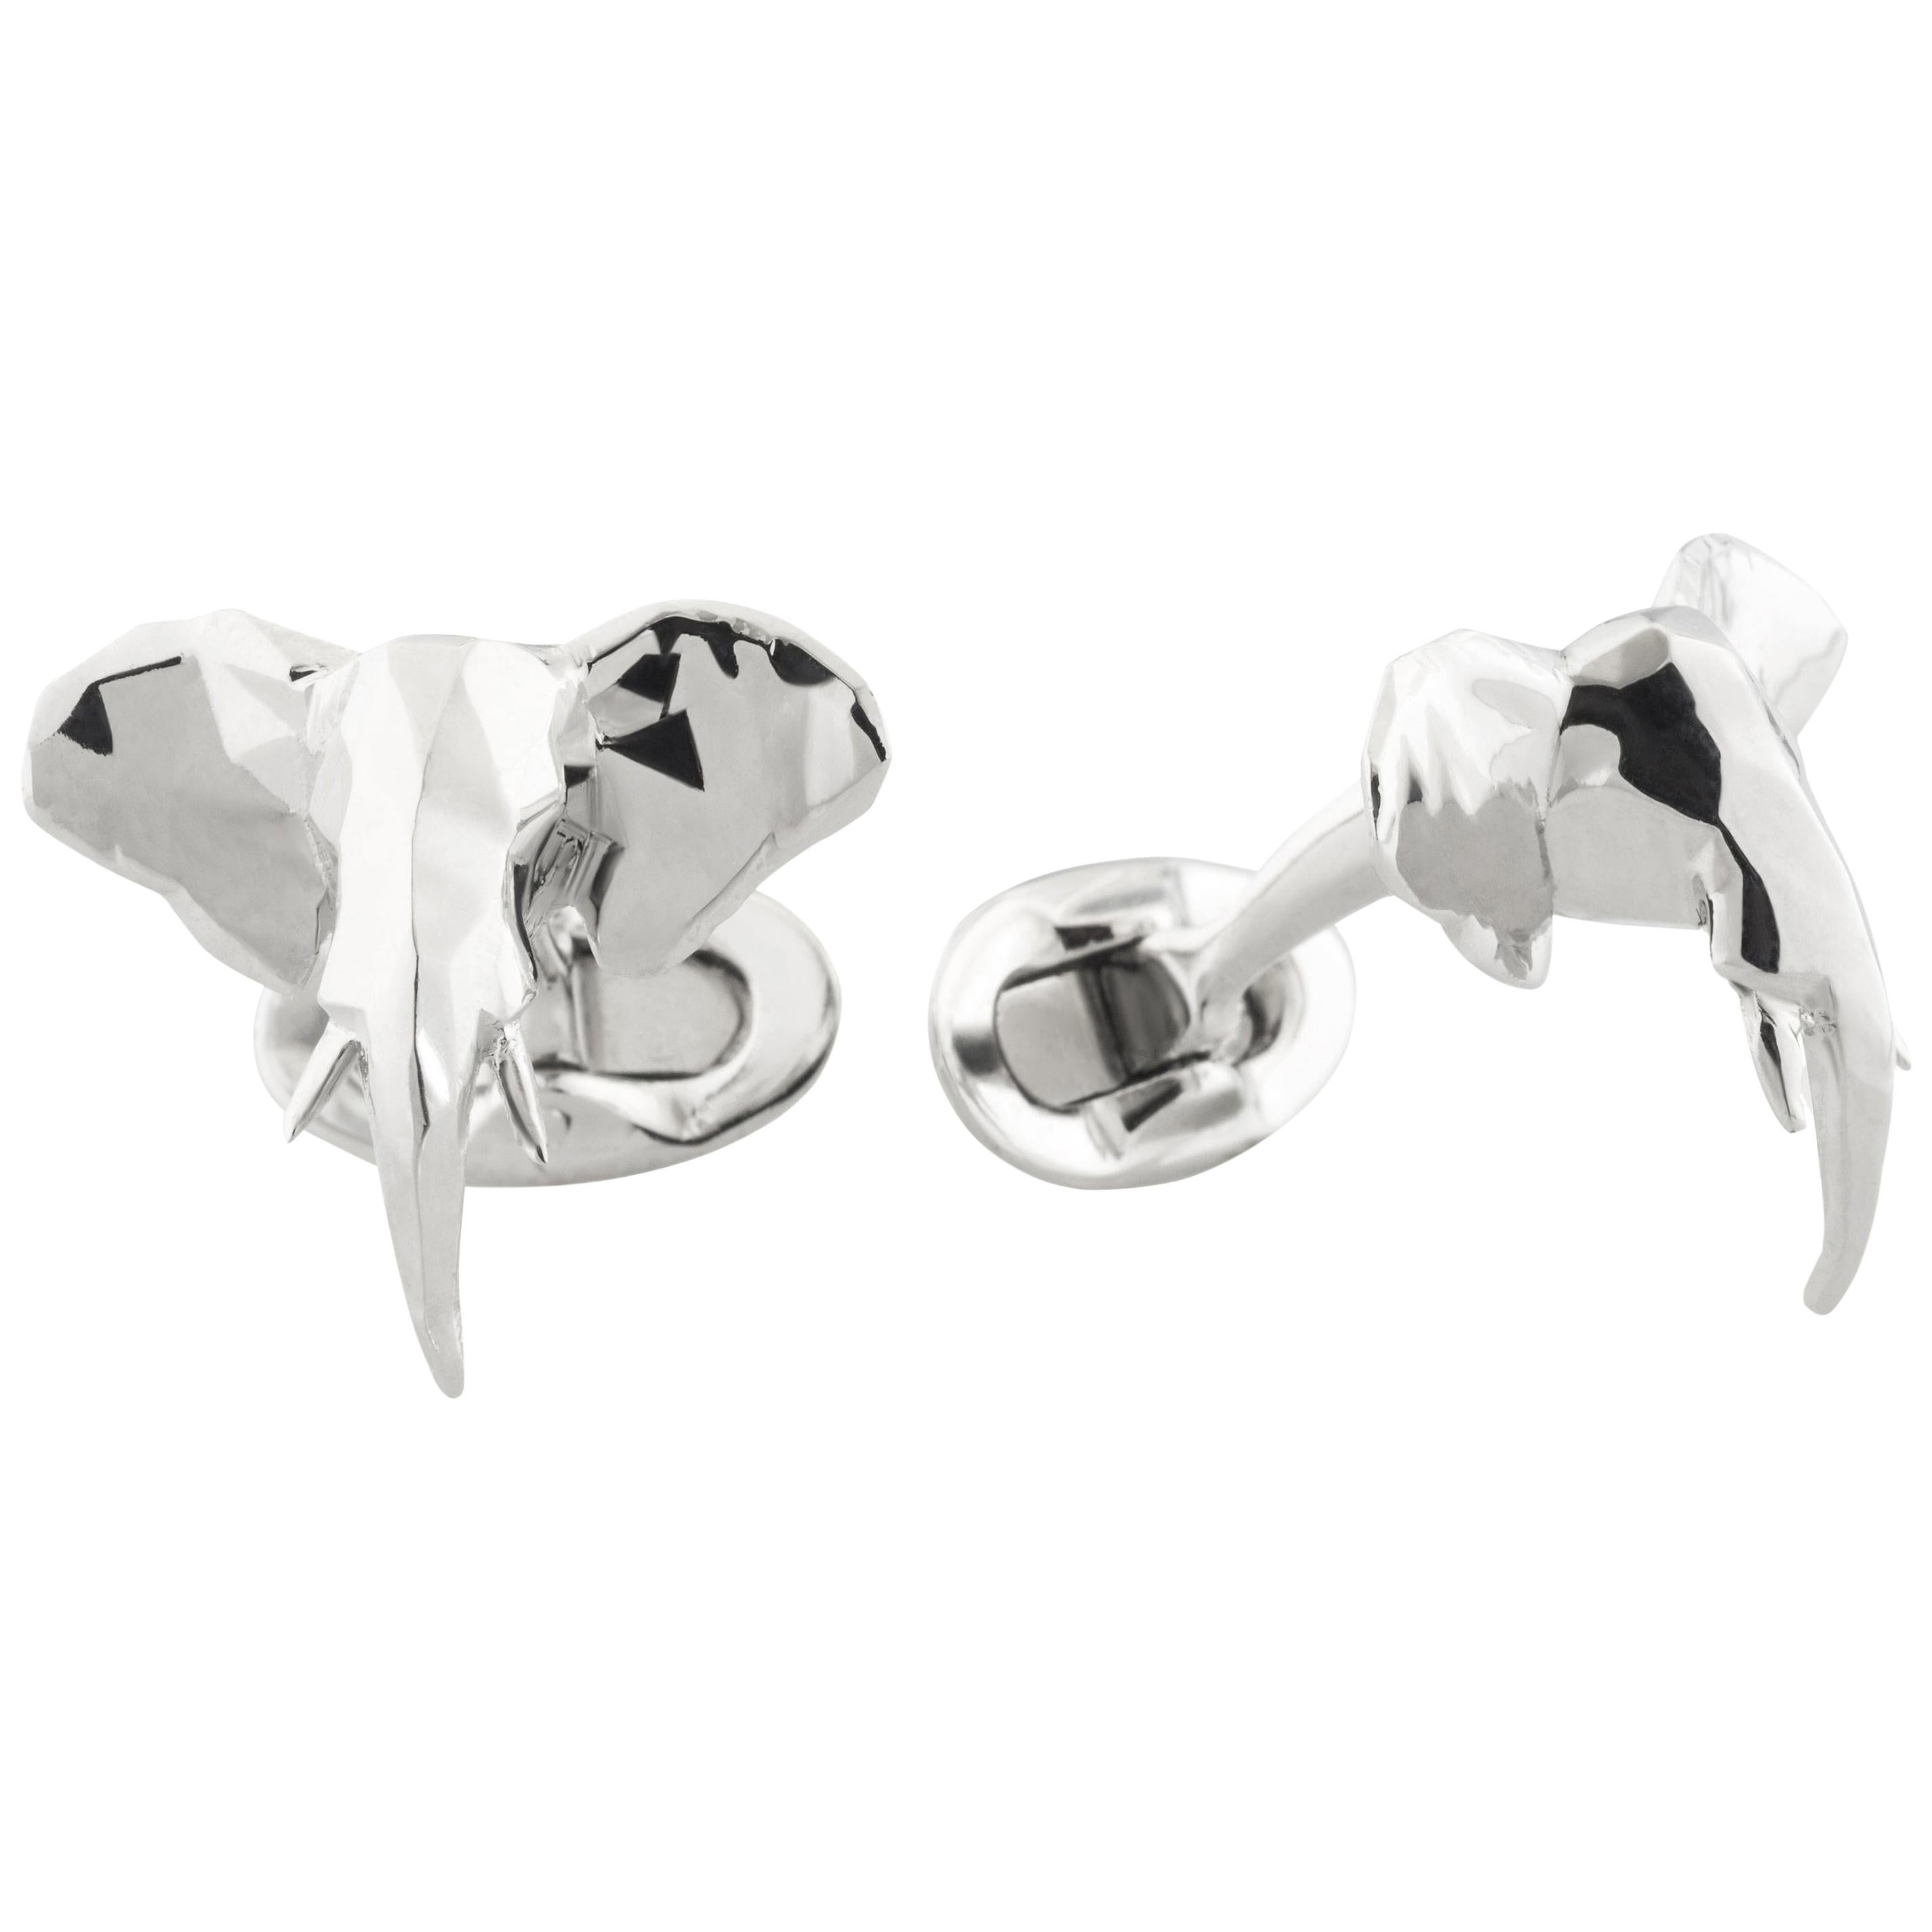 Faceted Elephant Head Cufflinks in Sterling Silver by Fils Unique